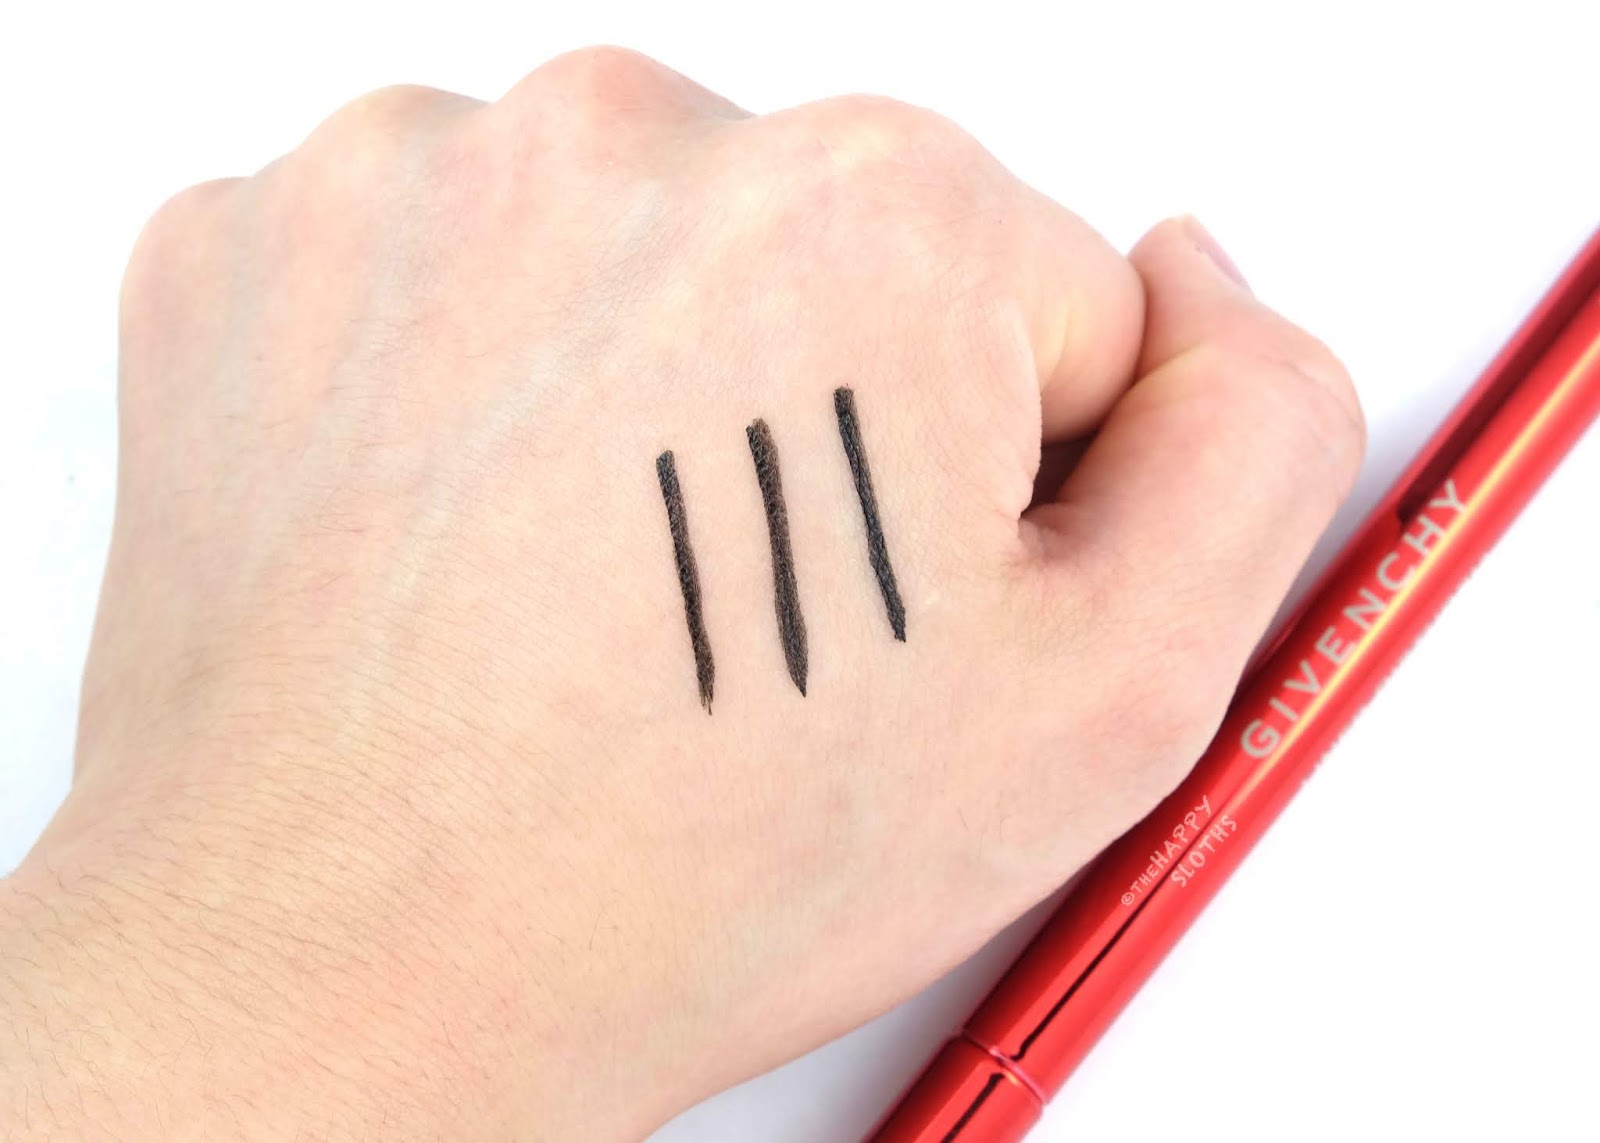 Givenchy | Liner Disturbia Felt Tip Eyeliner: Review and Swatches